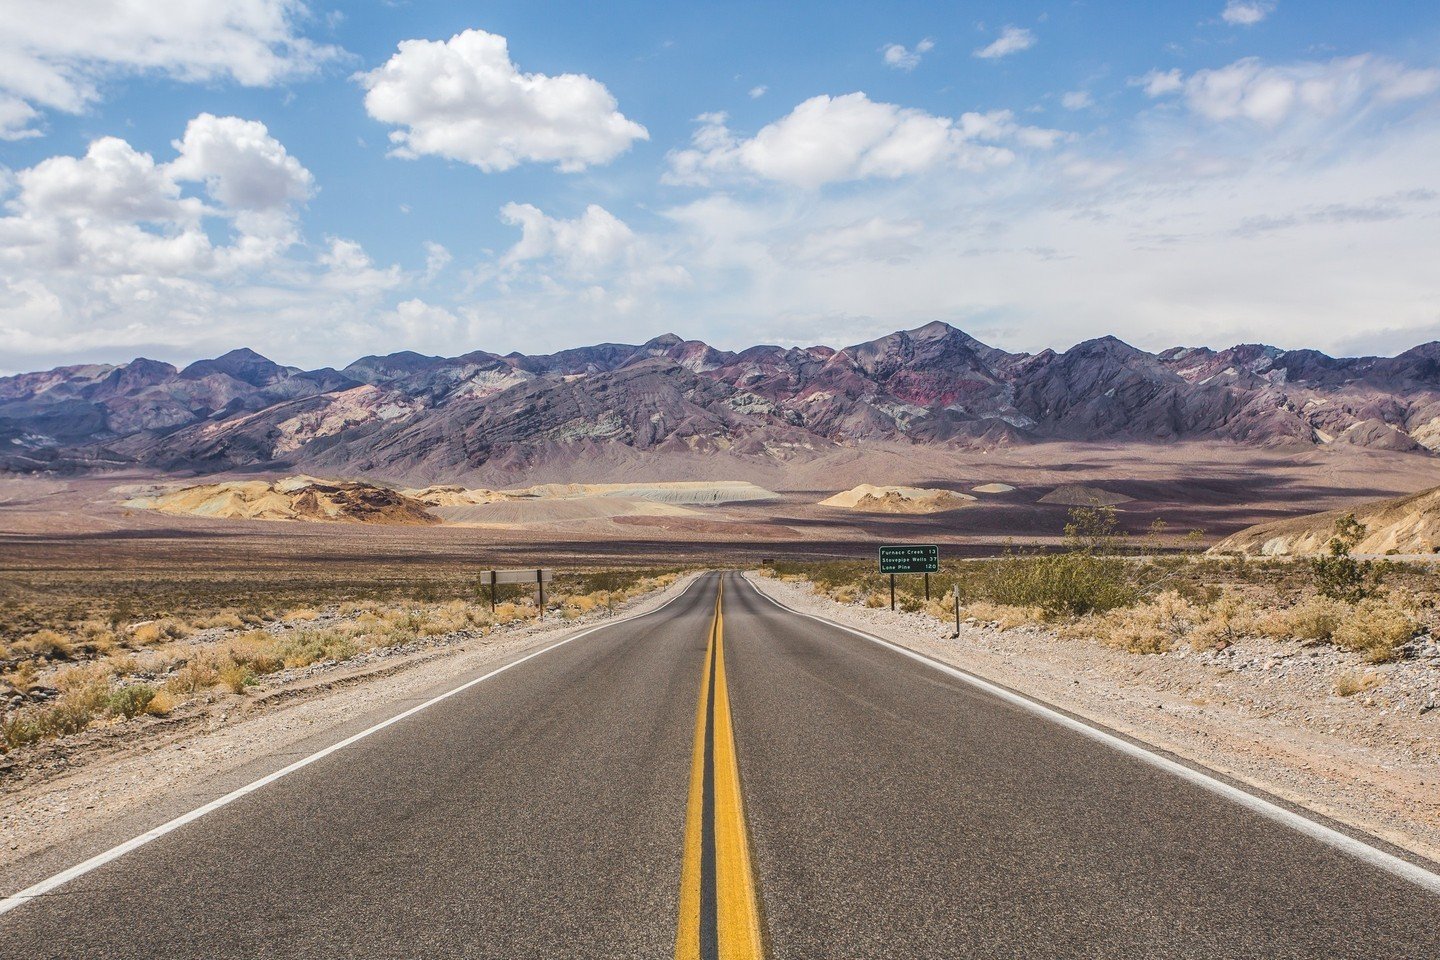 Death Valley 🇺🇸 is the ultimate hot spot for a #sundaydrive with summer temperatures soaring to over 50 degrees centigrade.⁠
⁠
&quot;Inside Death Valley National Park US 190 meanders gently towards Stovepipe Wells before veering right to Beatty Jun